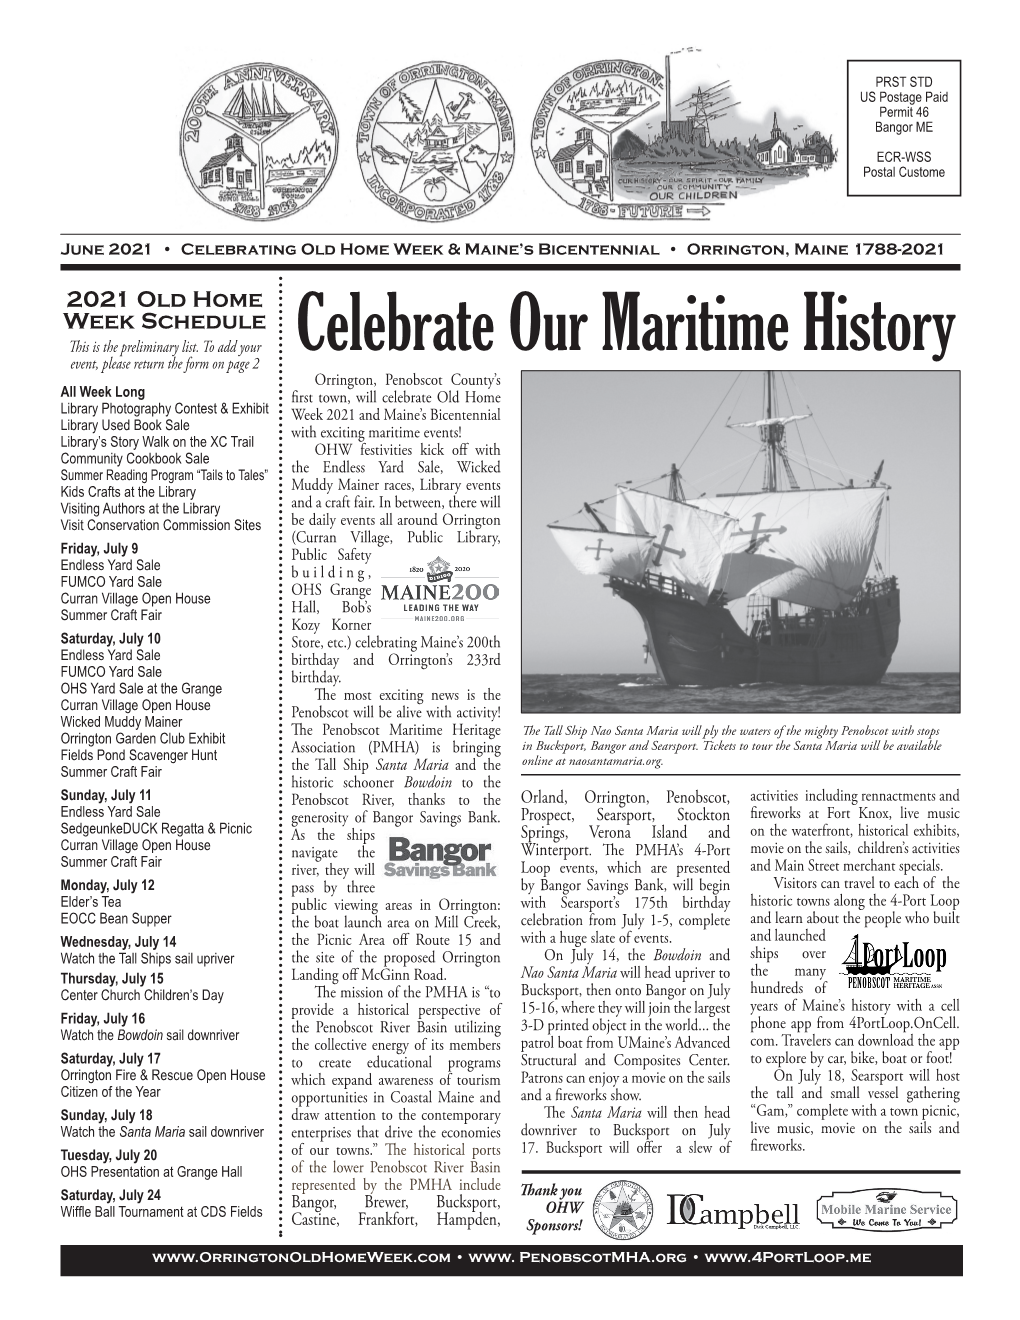 Celebrate Our Maritime History